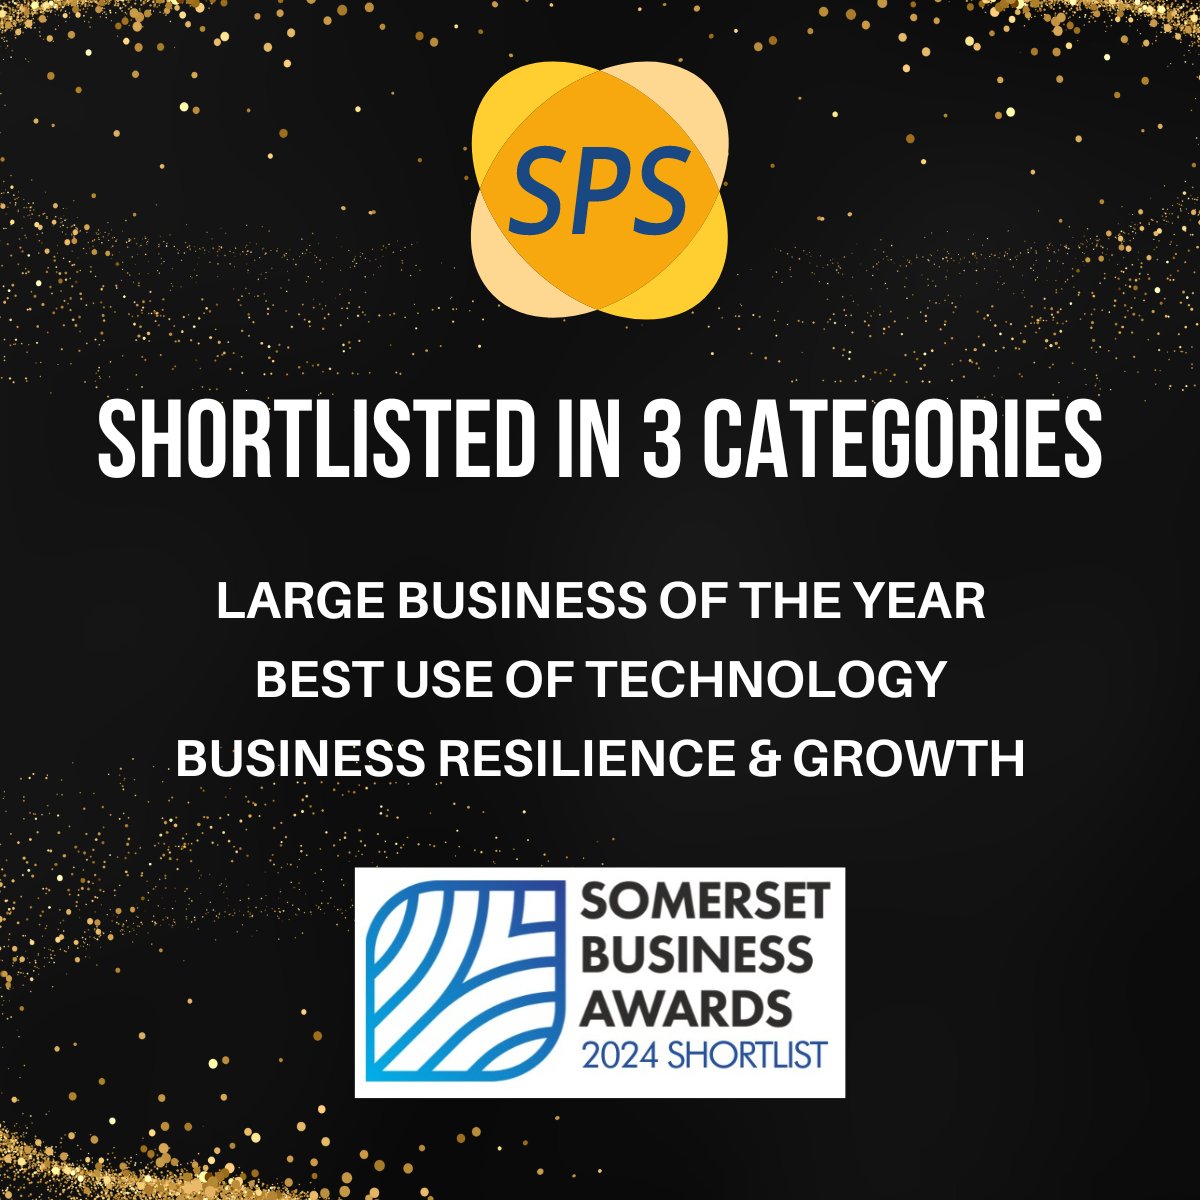 ⭐ We have been shortlisted in THREE categories at the 2024 Somerset Business Awards!

⭐  We look forward to meeting the judges and wish all companies the best of luck!

#SBA2024 #Awards #shortlisted #technology #businessresilience #growth #businessoftheyear